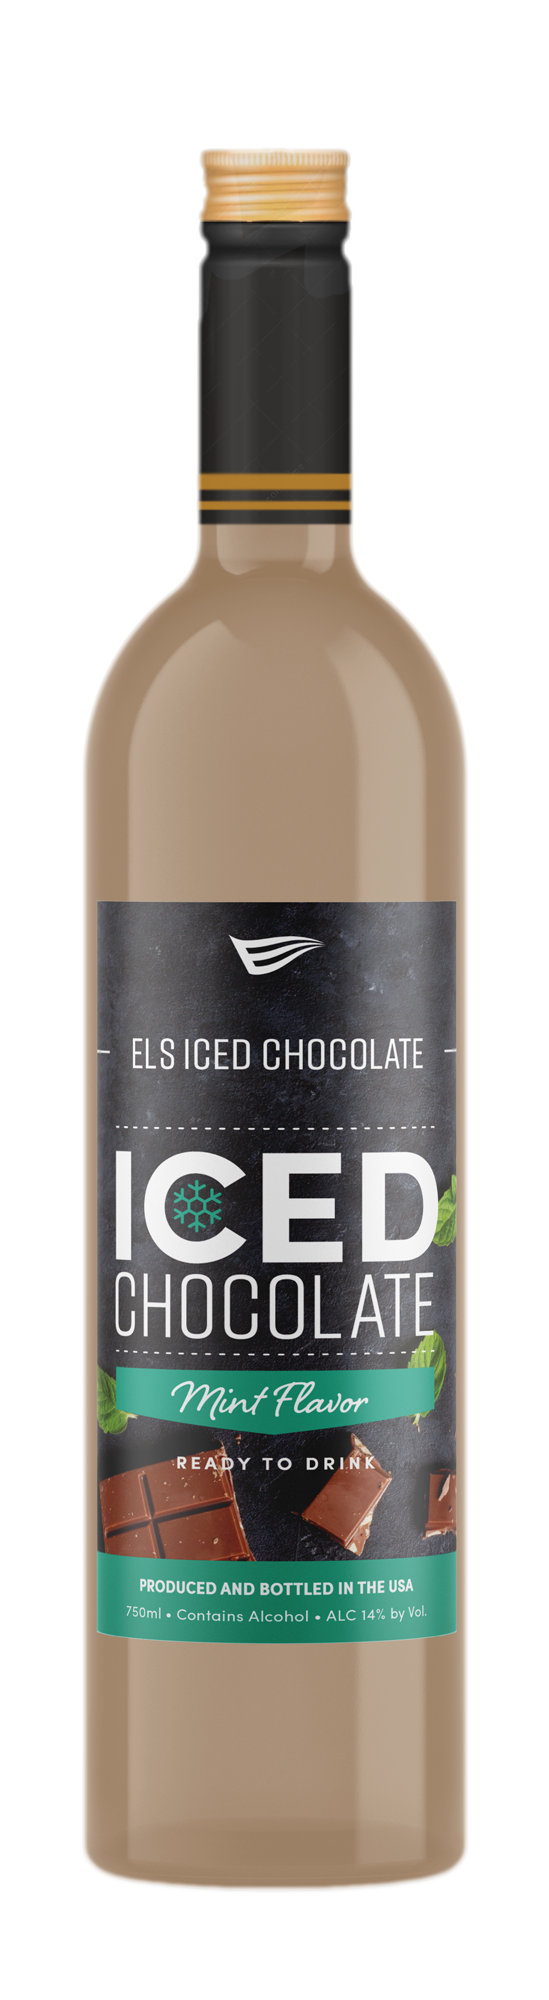 Els Iced Coffee Iced Chocolate Mint Flavor Ready-to-drink - 750ml Bottle